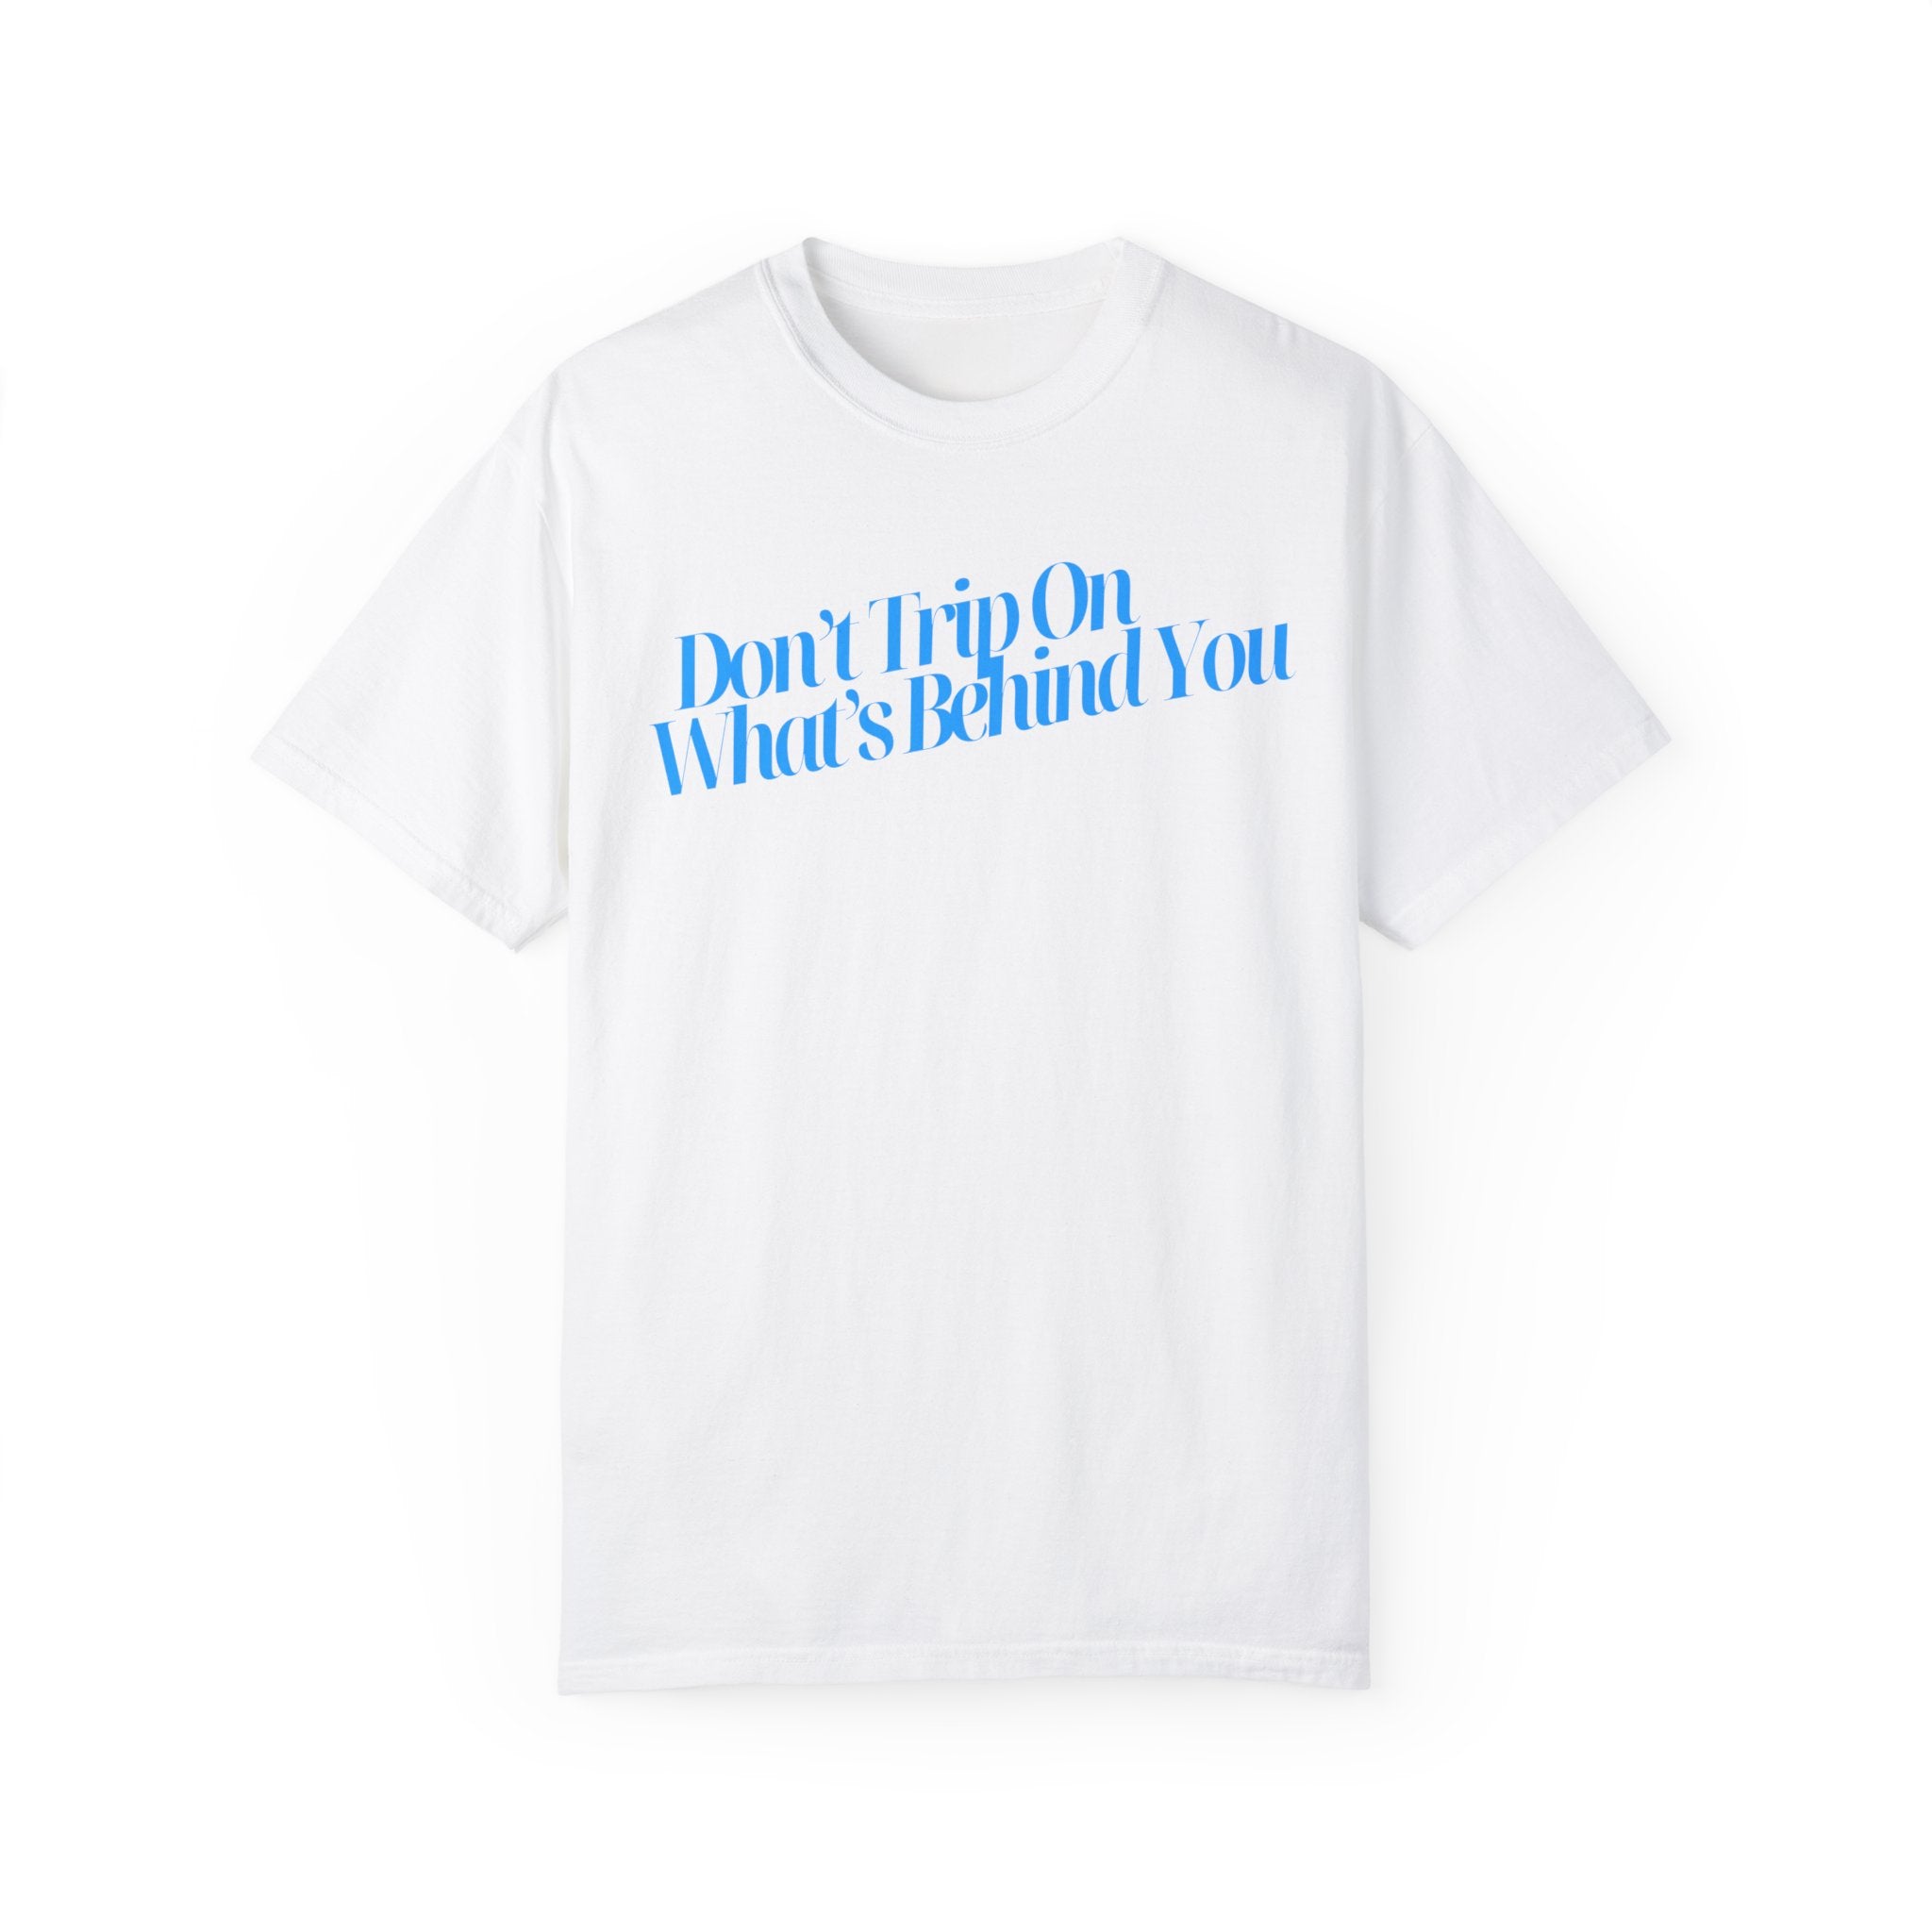 Don't Trip on What's Behind You Comfort Colors T Shirt